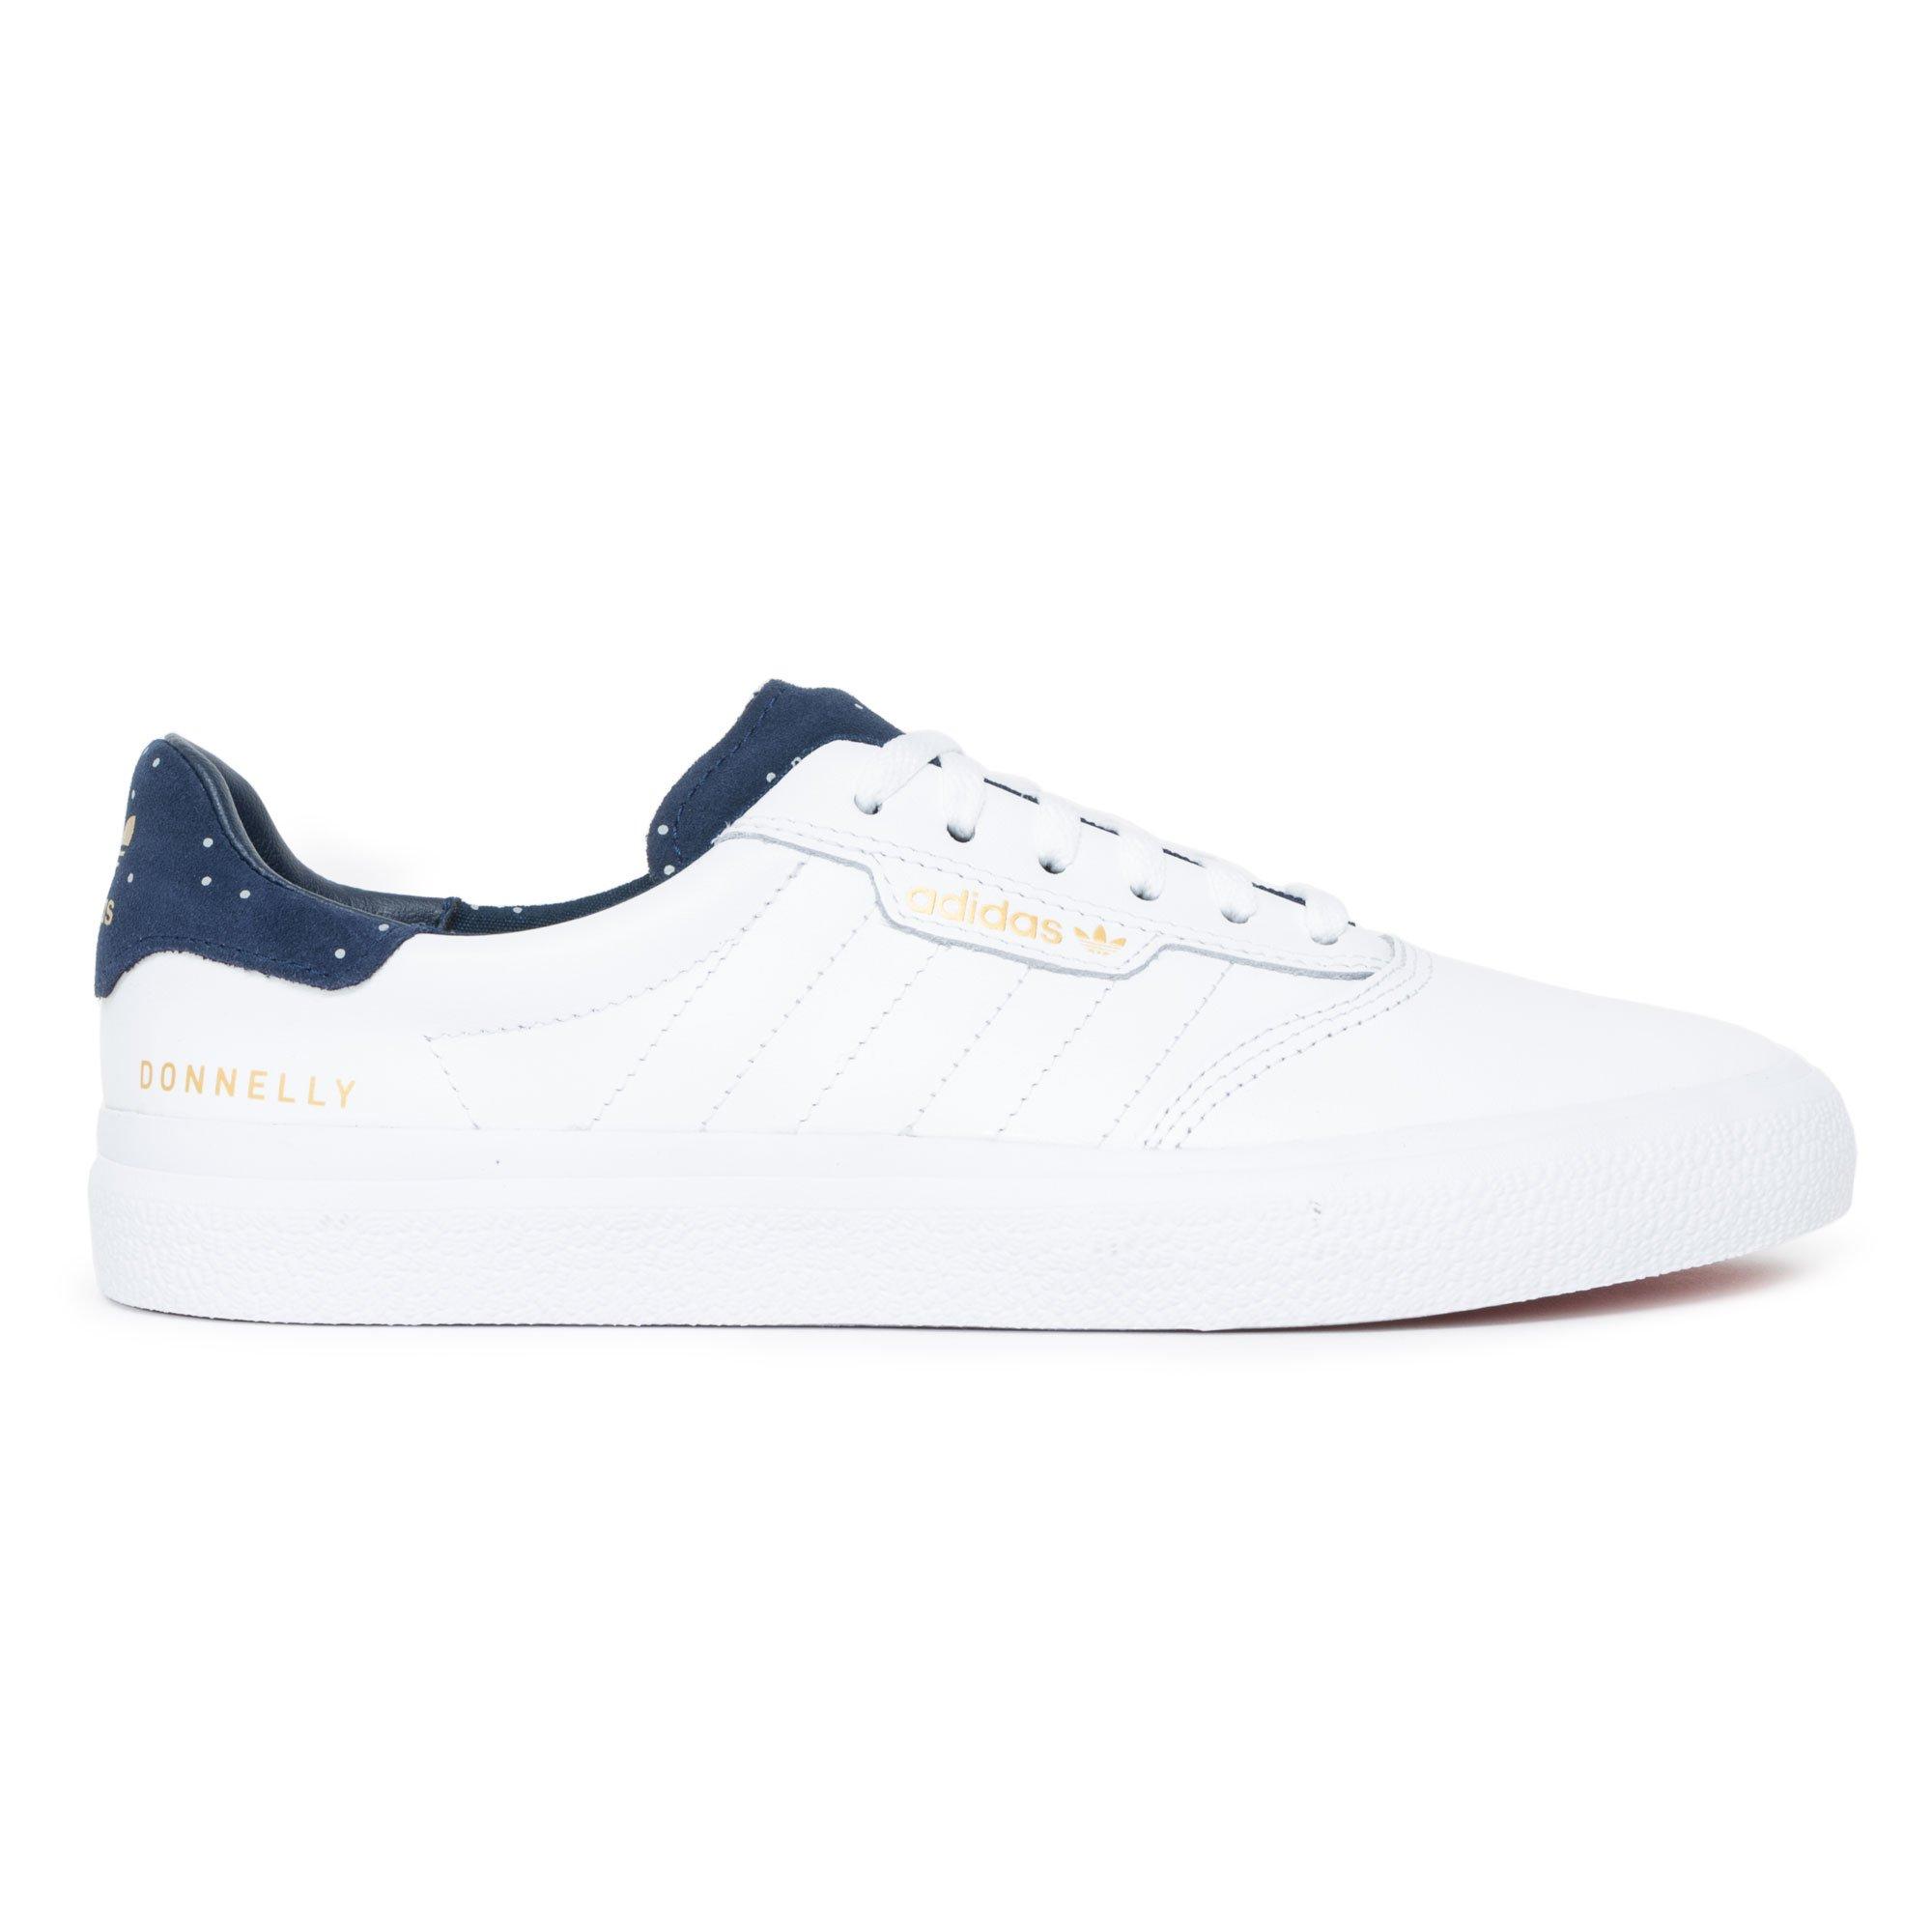 adidas Leather 3mc X Jake Donnelly Shoes in White for Men - Lyst